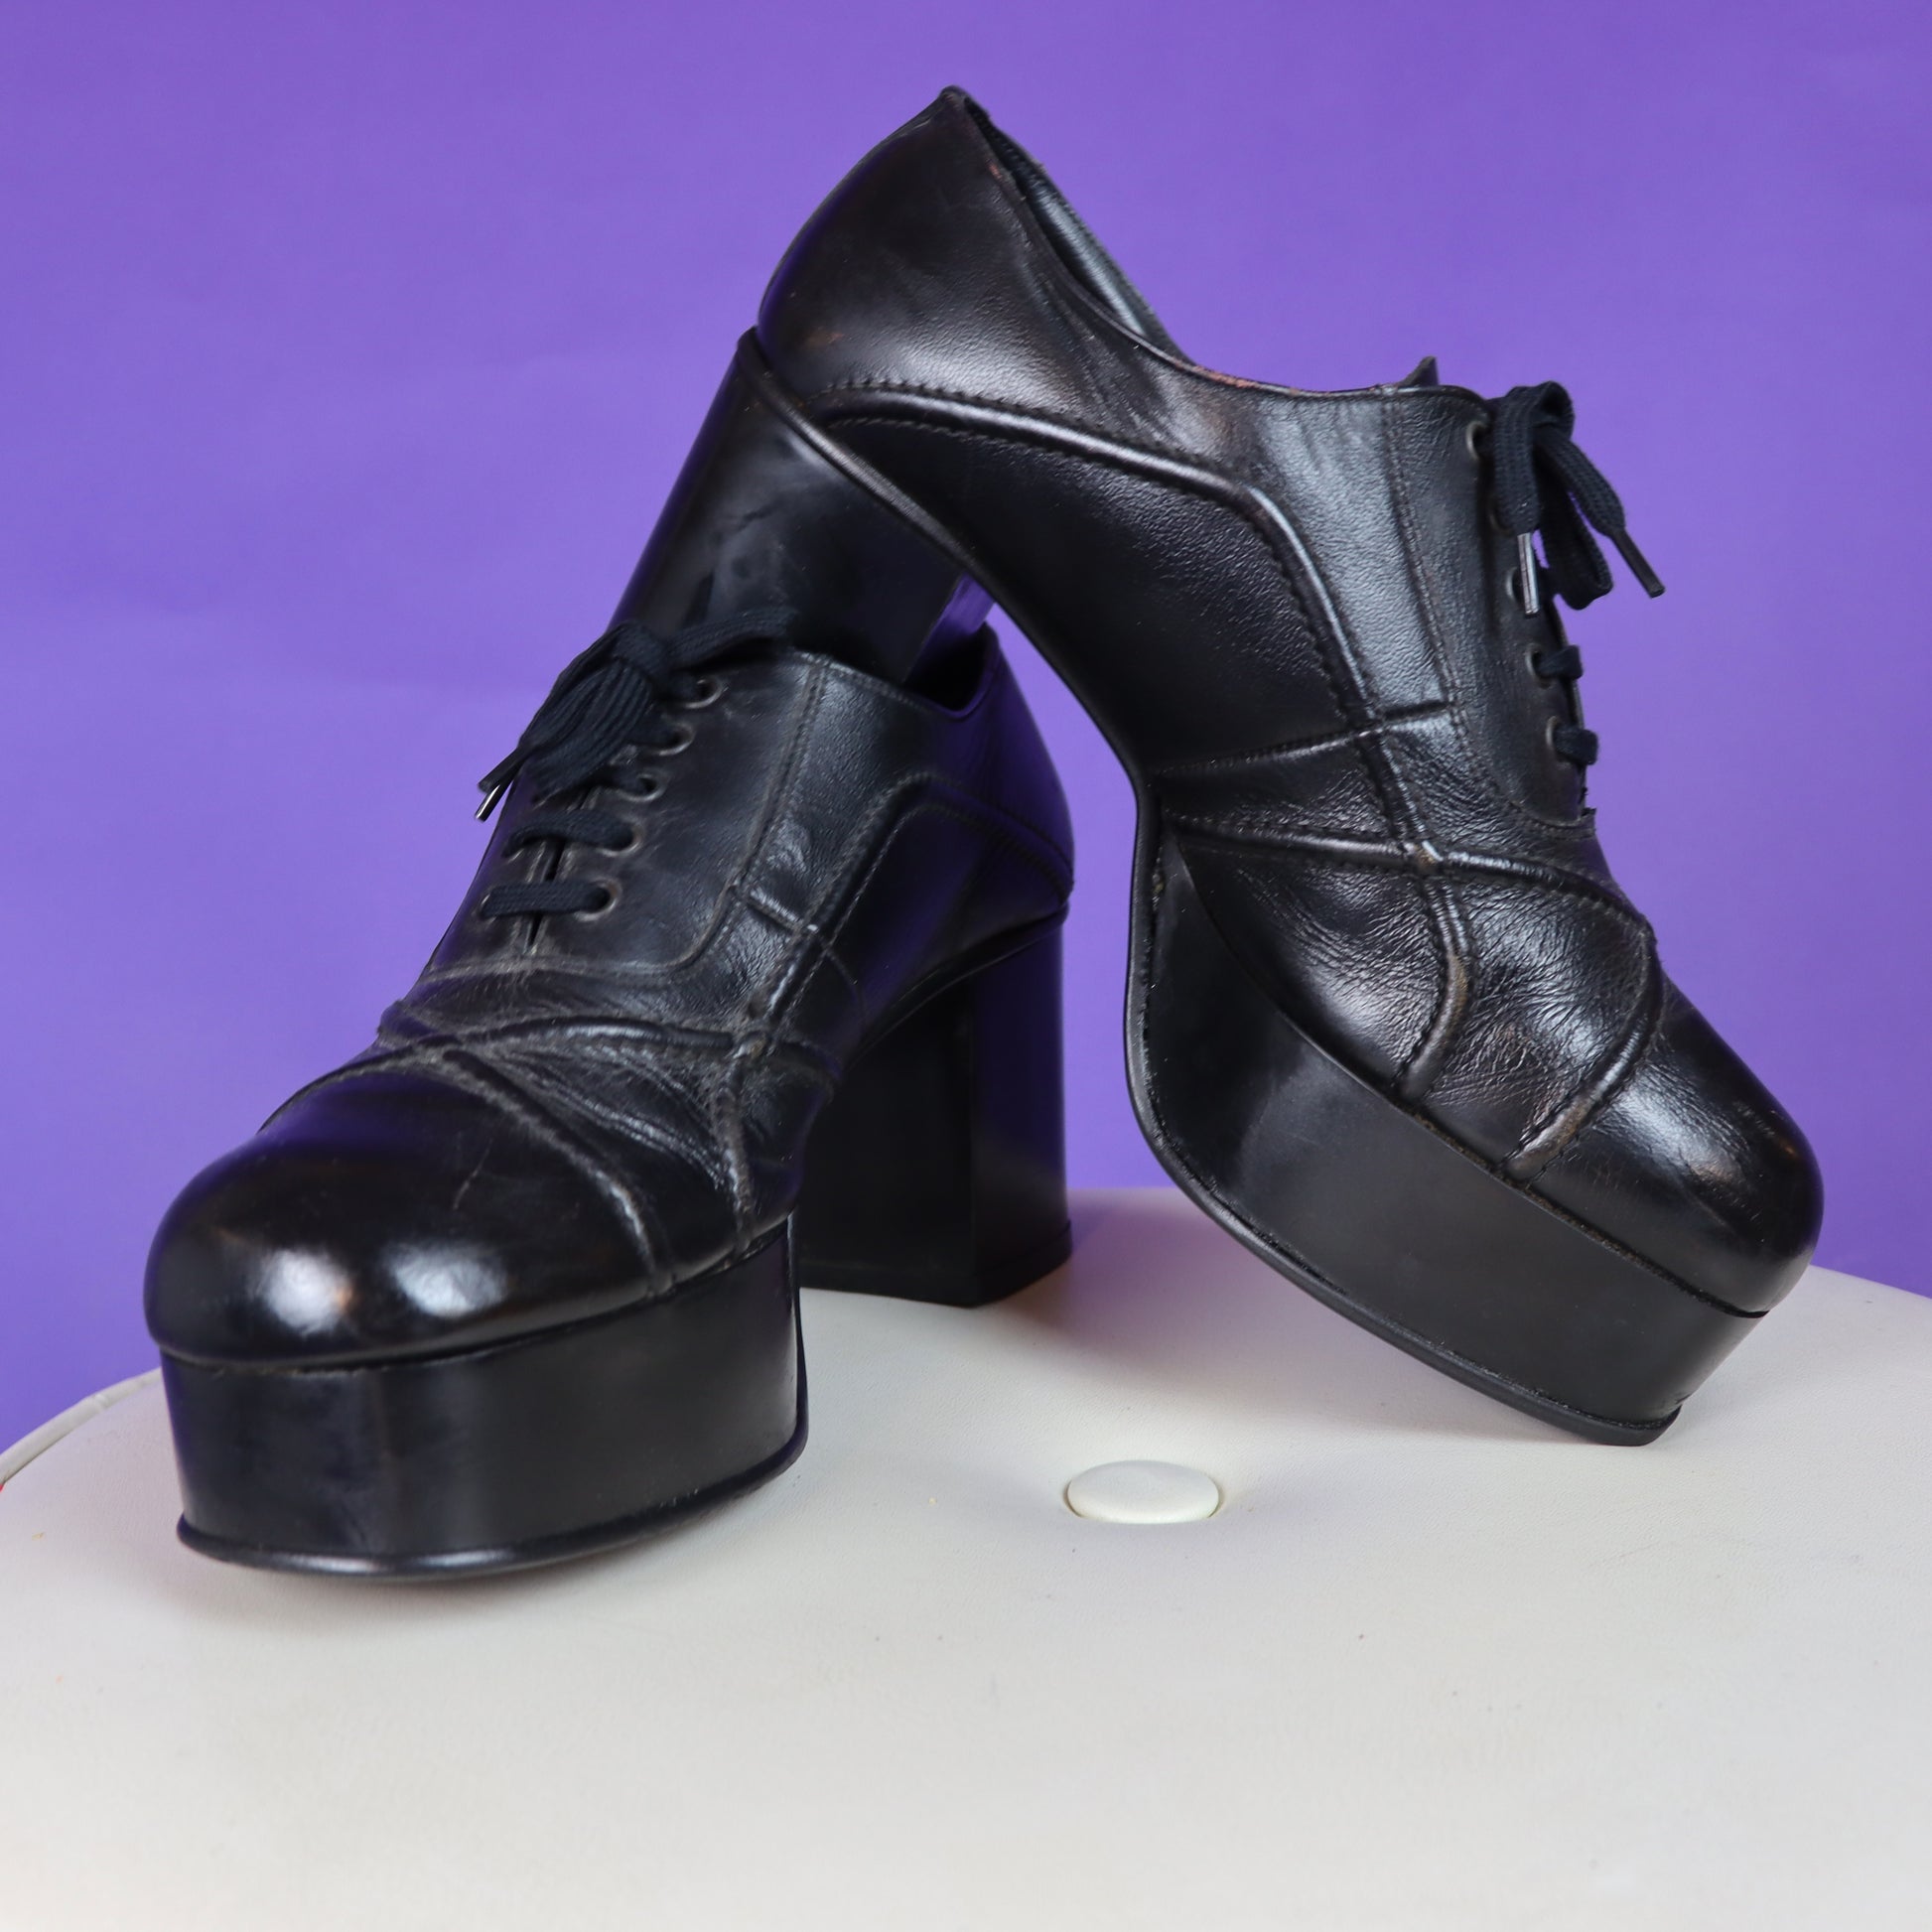 13 Platform Shoes You Loved In The '90s, Because They Were All The